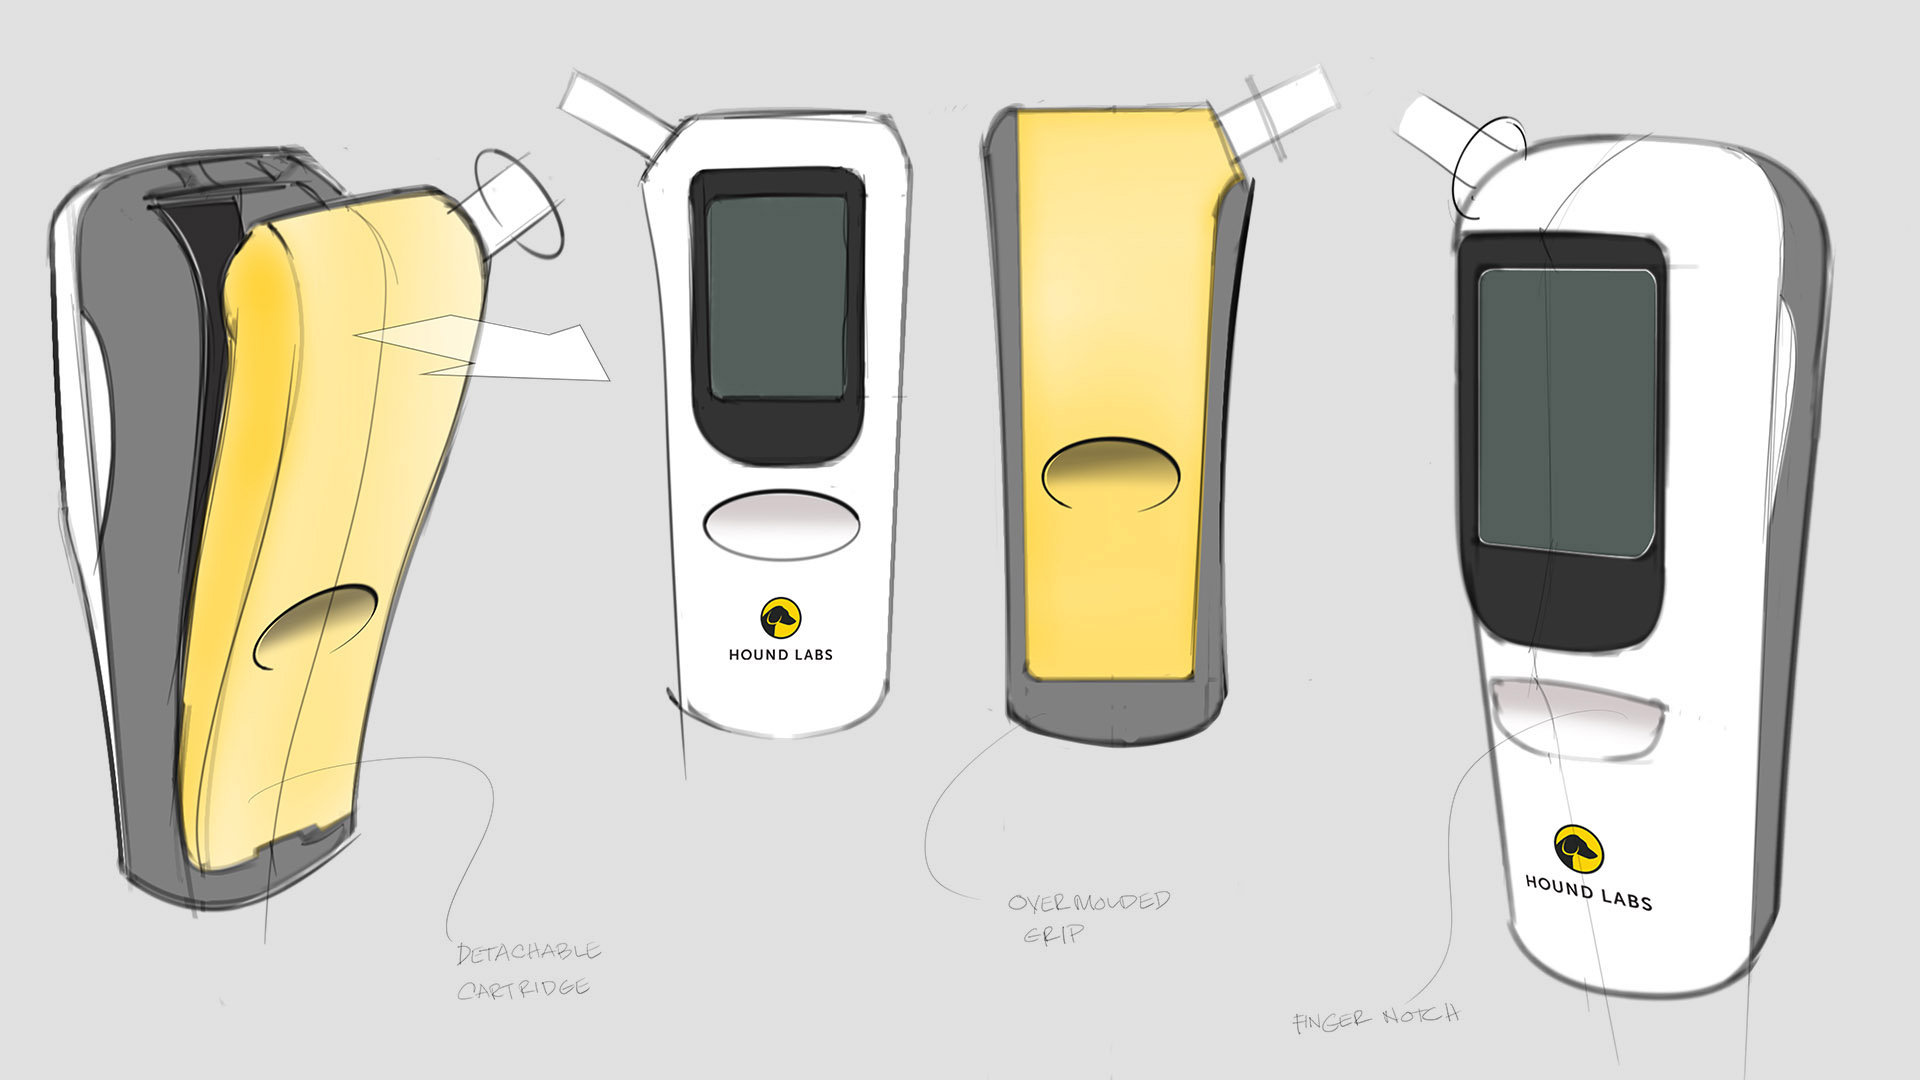 Four conceptual sketches of the handheld Hound Labs cannabis breathalyzer device with different design features highlighted.